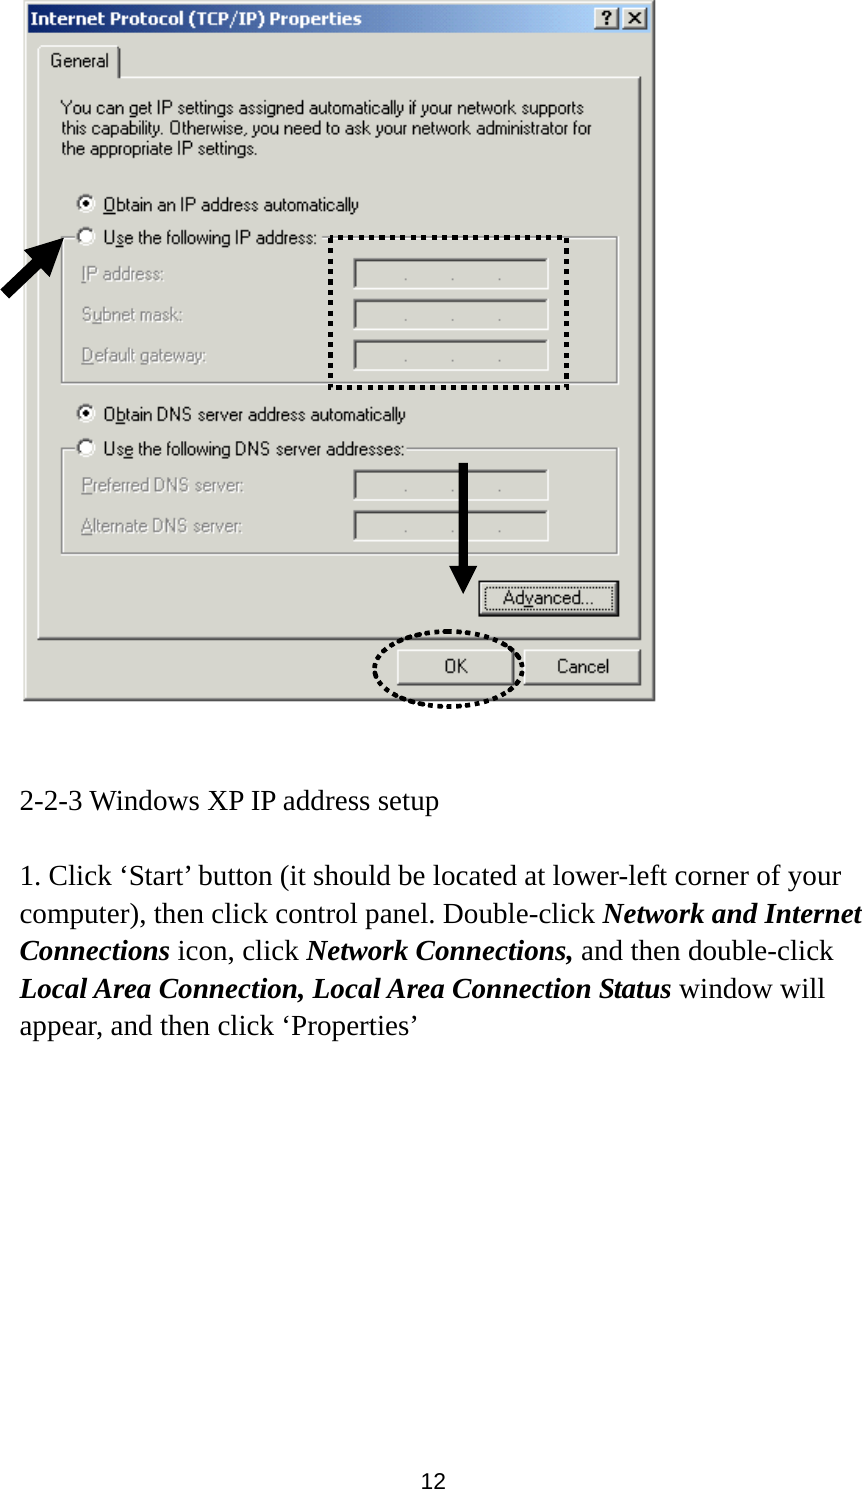  12    2-2-3 Windows XP IP address setup  1. Click ‘Start’ button (it should be located at lower-left corner of your computer), then click control panel. Double-click Network and Internet Connections icon, click Network Connections, and then double-click Local Area Connection, Local Area Connection Status window will appear, and then click ‘Properties’  